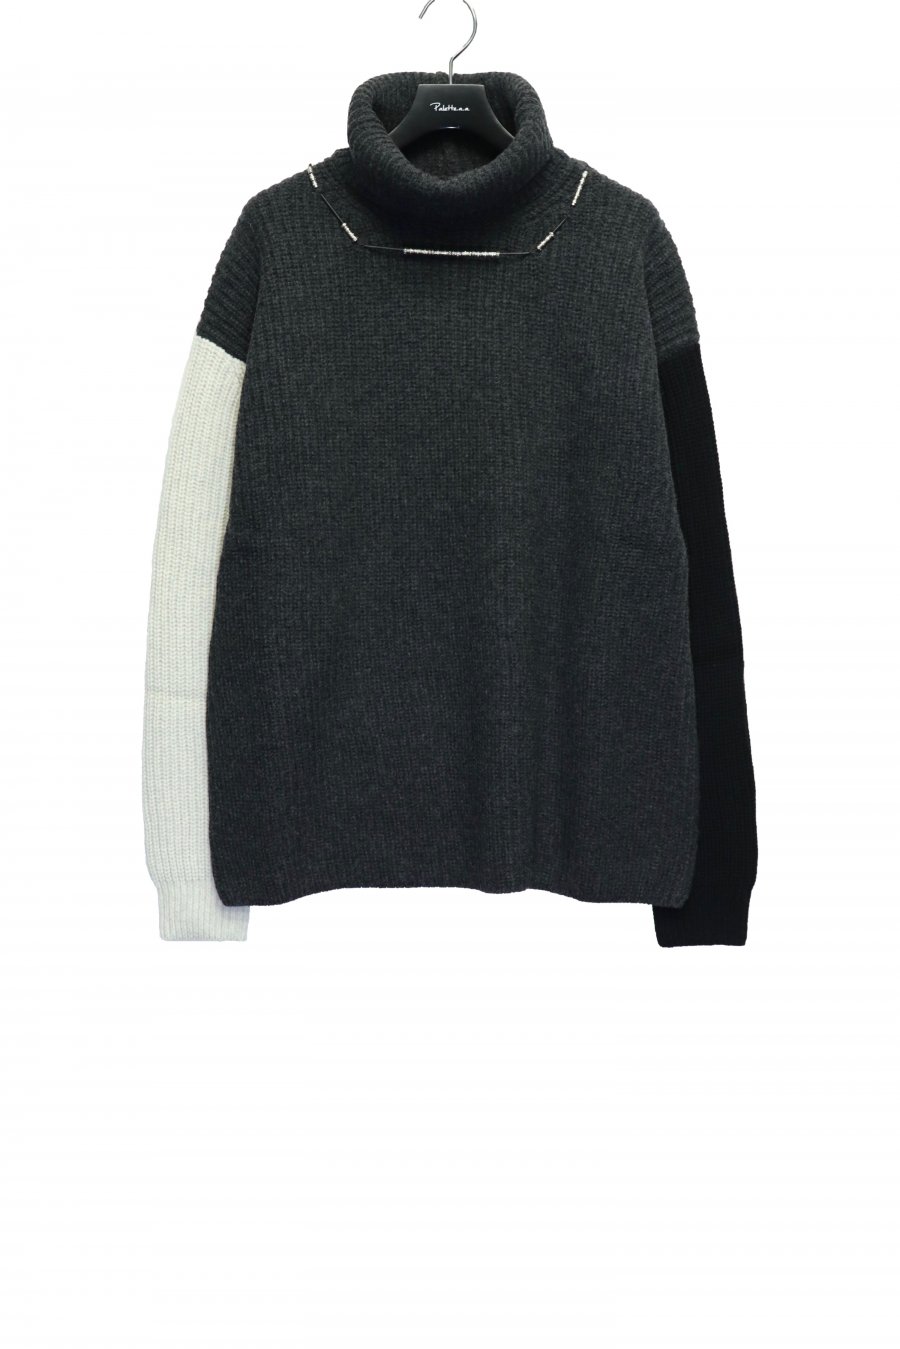 Children of the discordance  OVERSIZED CHANGEOVER HI-NECK KNIT(GRAY)<img class='new_mark_img2' src='https://img.shop-pro.jp/img/new/icons15.gif' style='border:none;display:inline;margin:0px;padding:0px;width:auto;' />